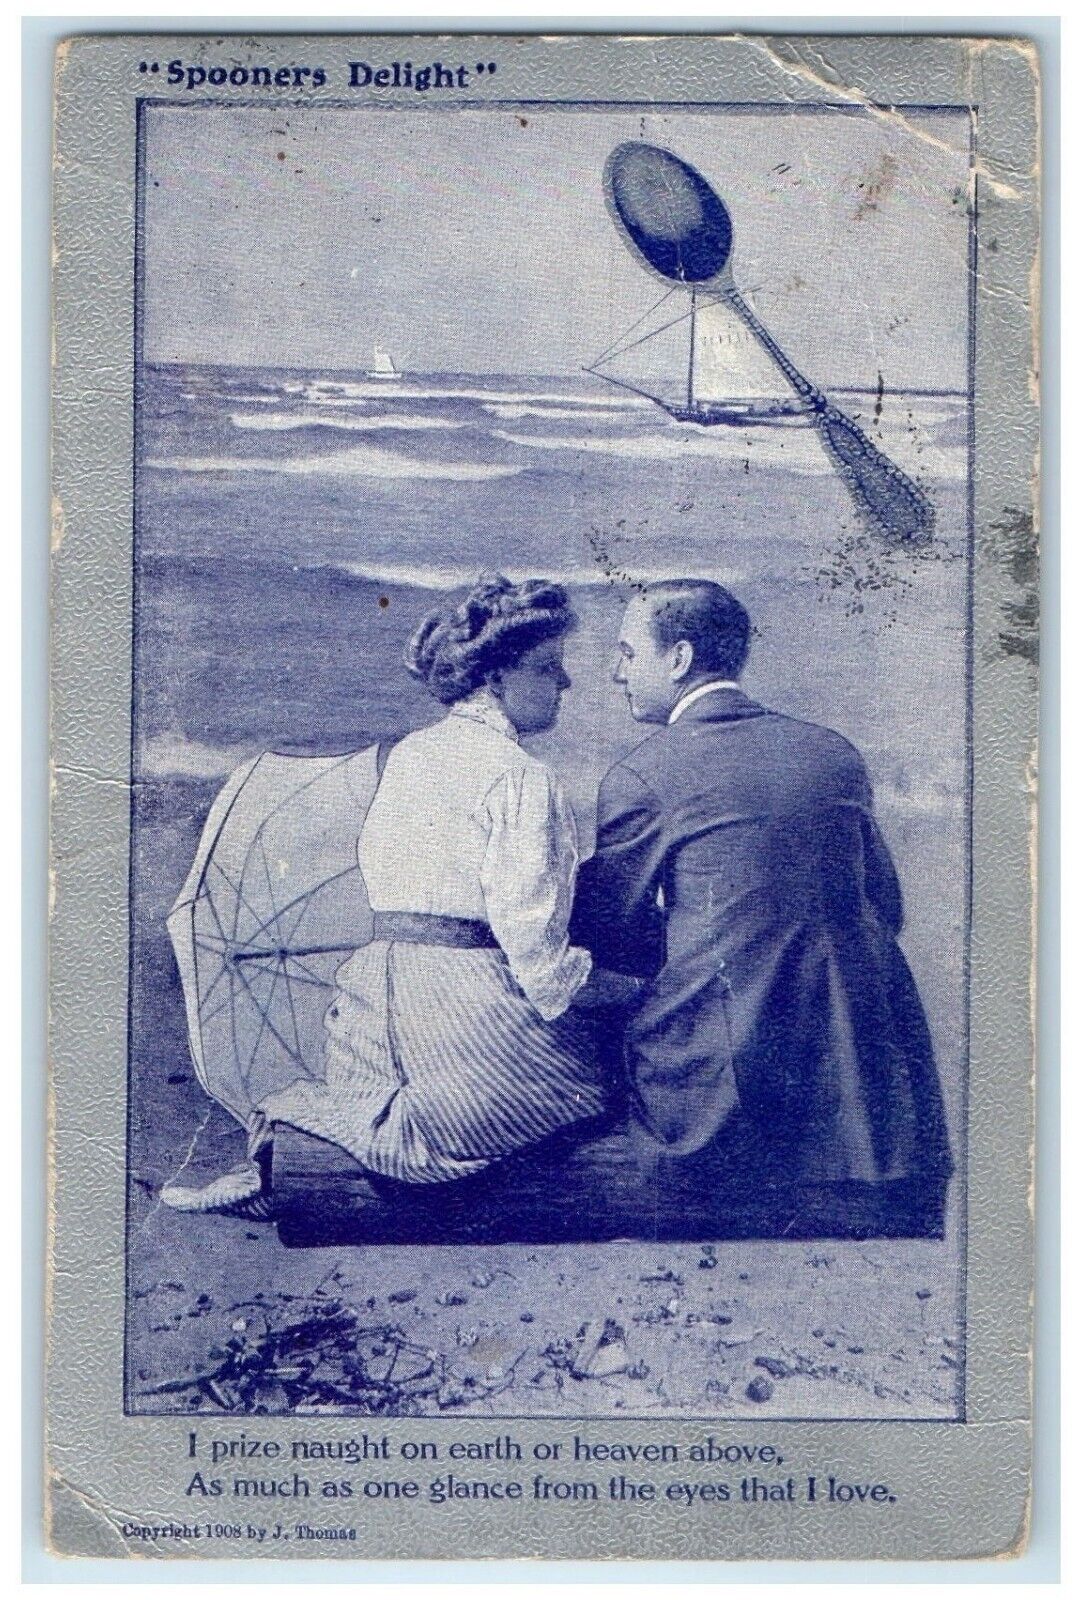 1908 Couple Romance At The Beach Spooners Delight Canby MN Antique Postcard